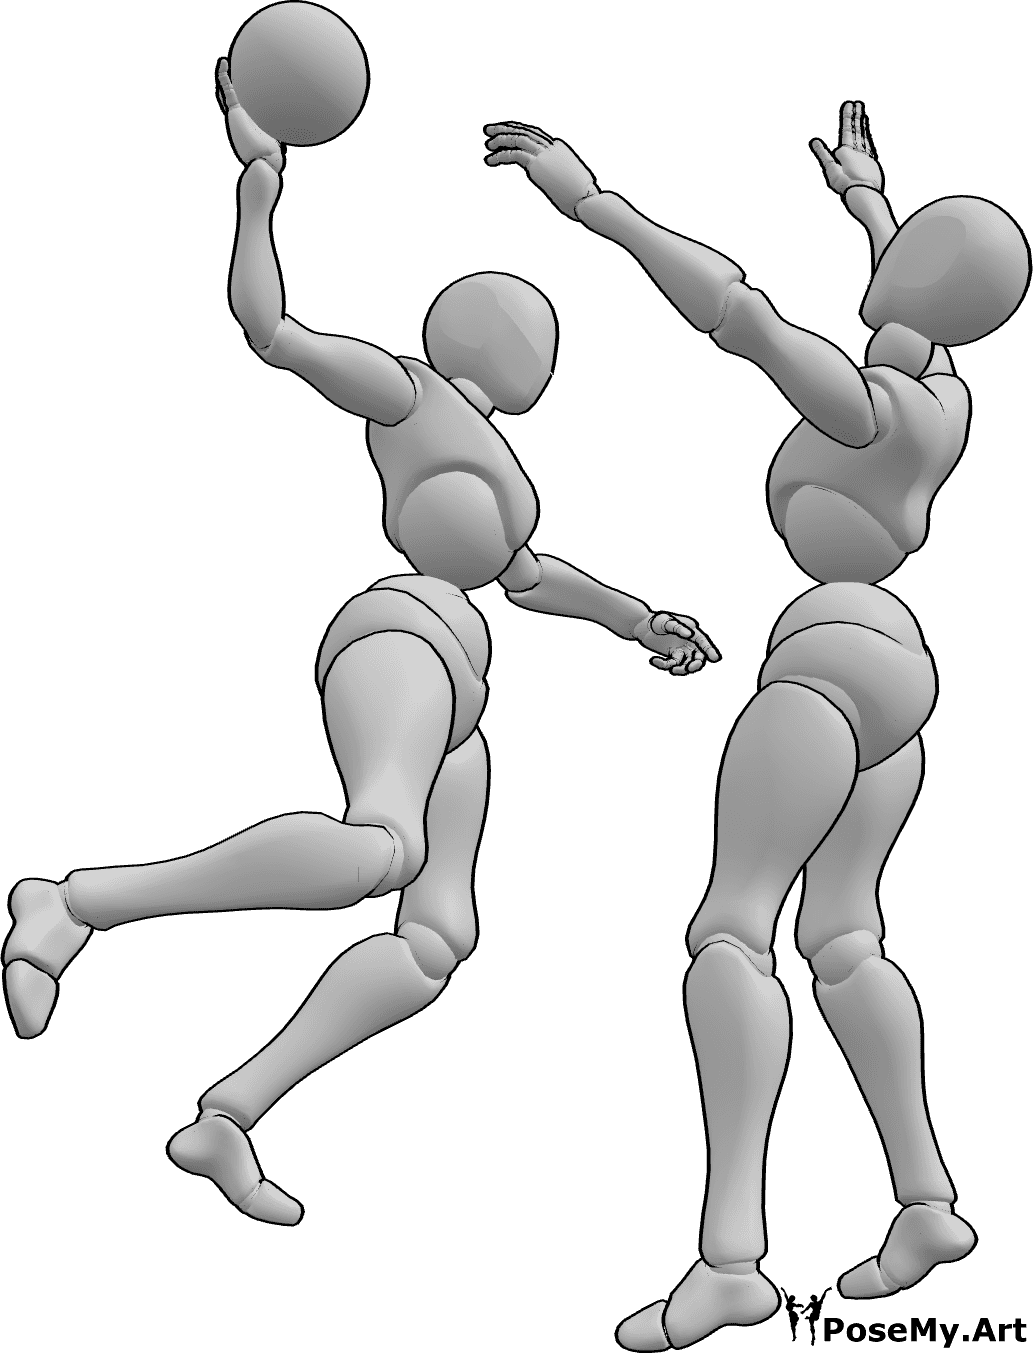 Pose Reference- Female players passing pose - Two females are playing handball, one of them is jumping and passing the ball